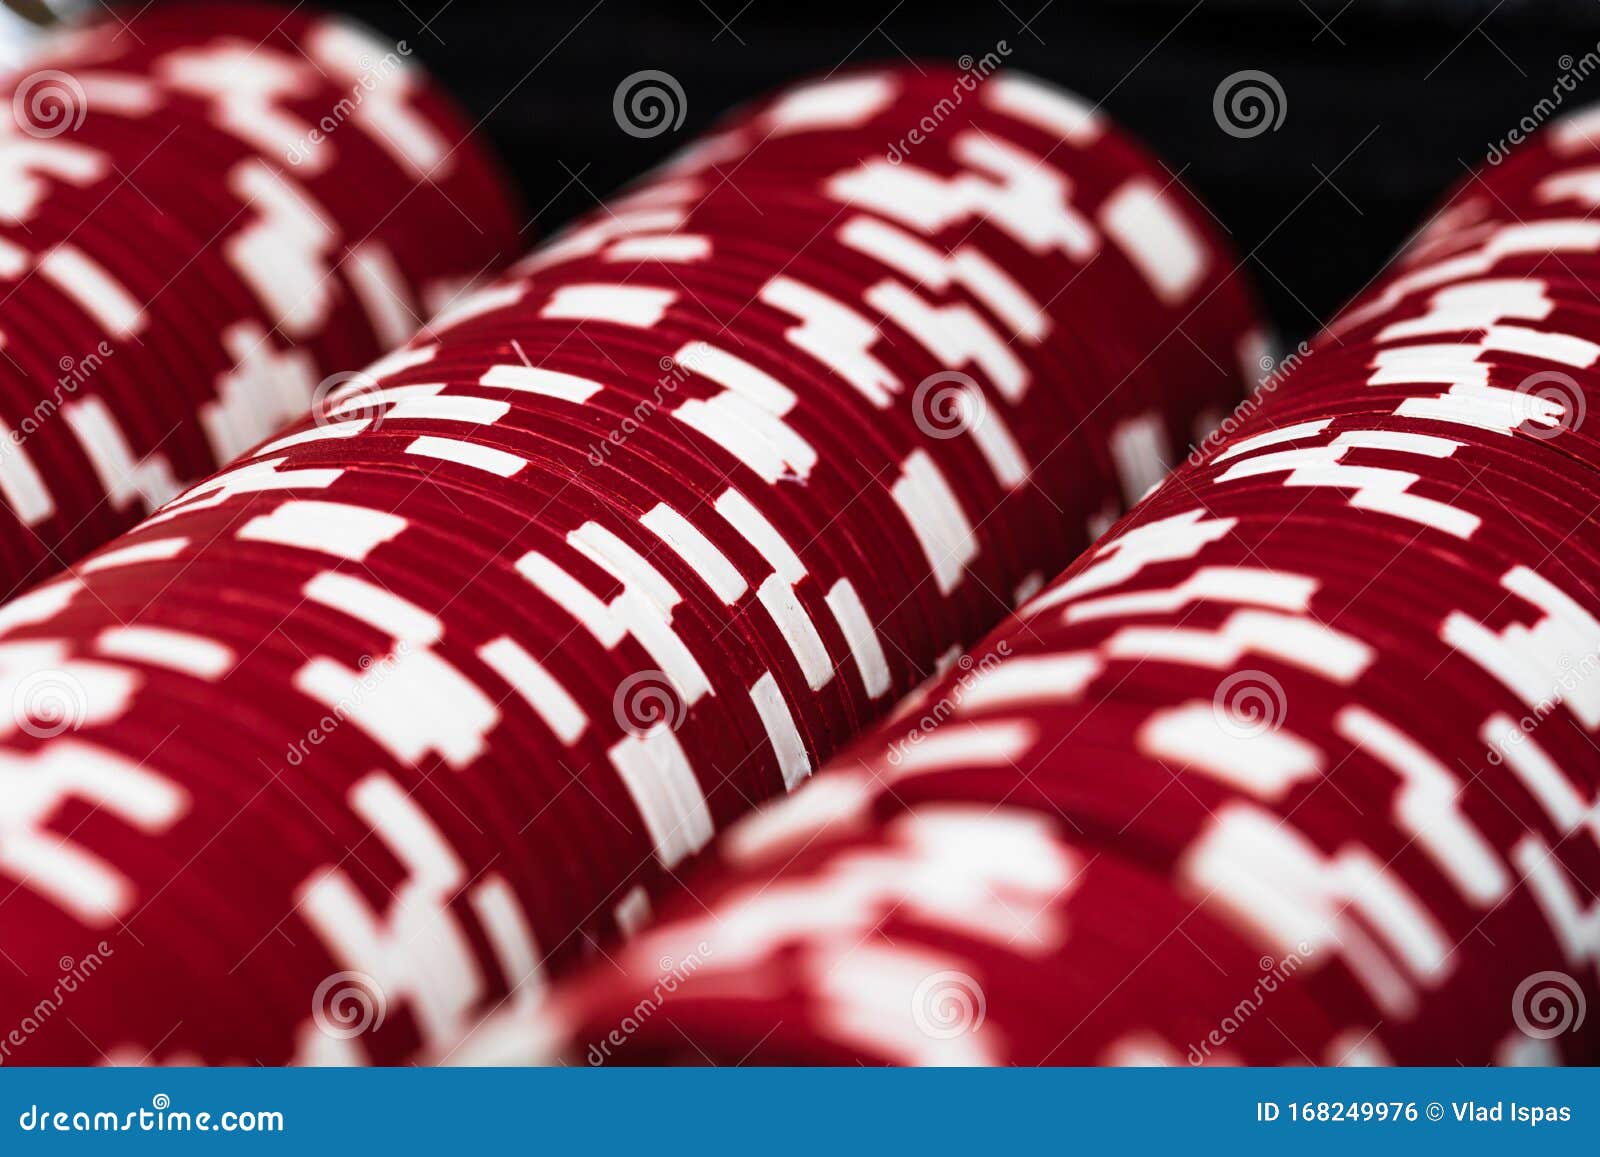 Poker Chips Close Up Background Casino Concept Risk Chance Good Luck Or Gambling Detail Of Casino Chips In The Box Stock Photo Image Of Cards Aces 168249976